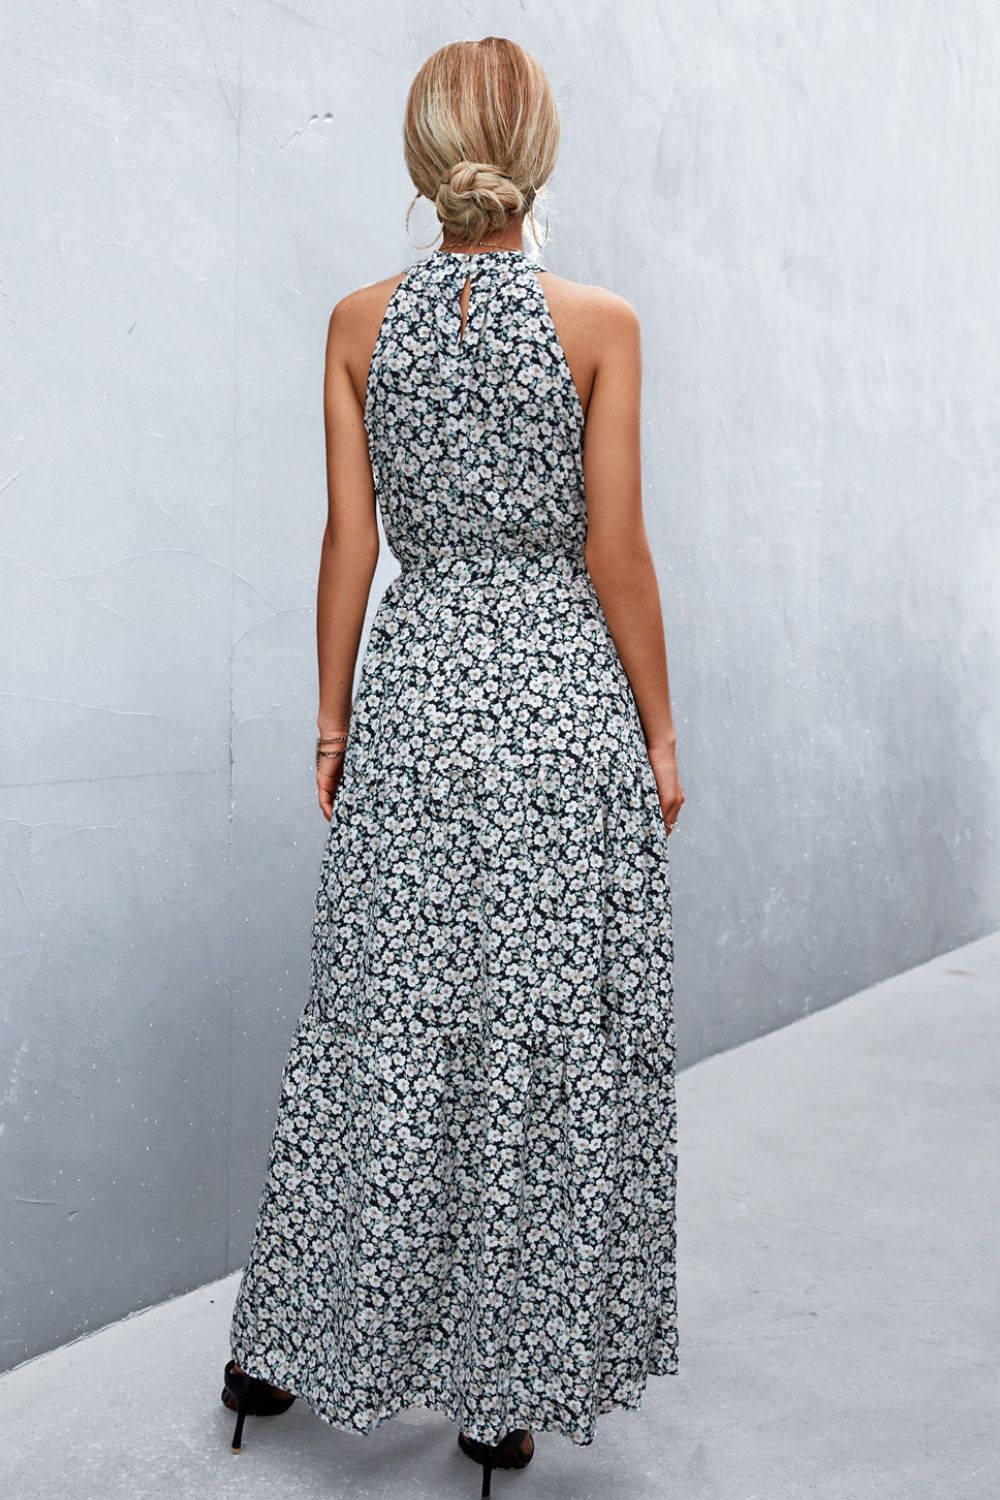 Let Me Remind You Printed Maxi Dress - black floral maxi dress with halter neck and tie waist. #Firefly Lane Boutique1